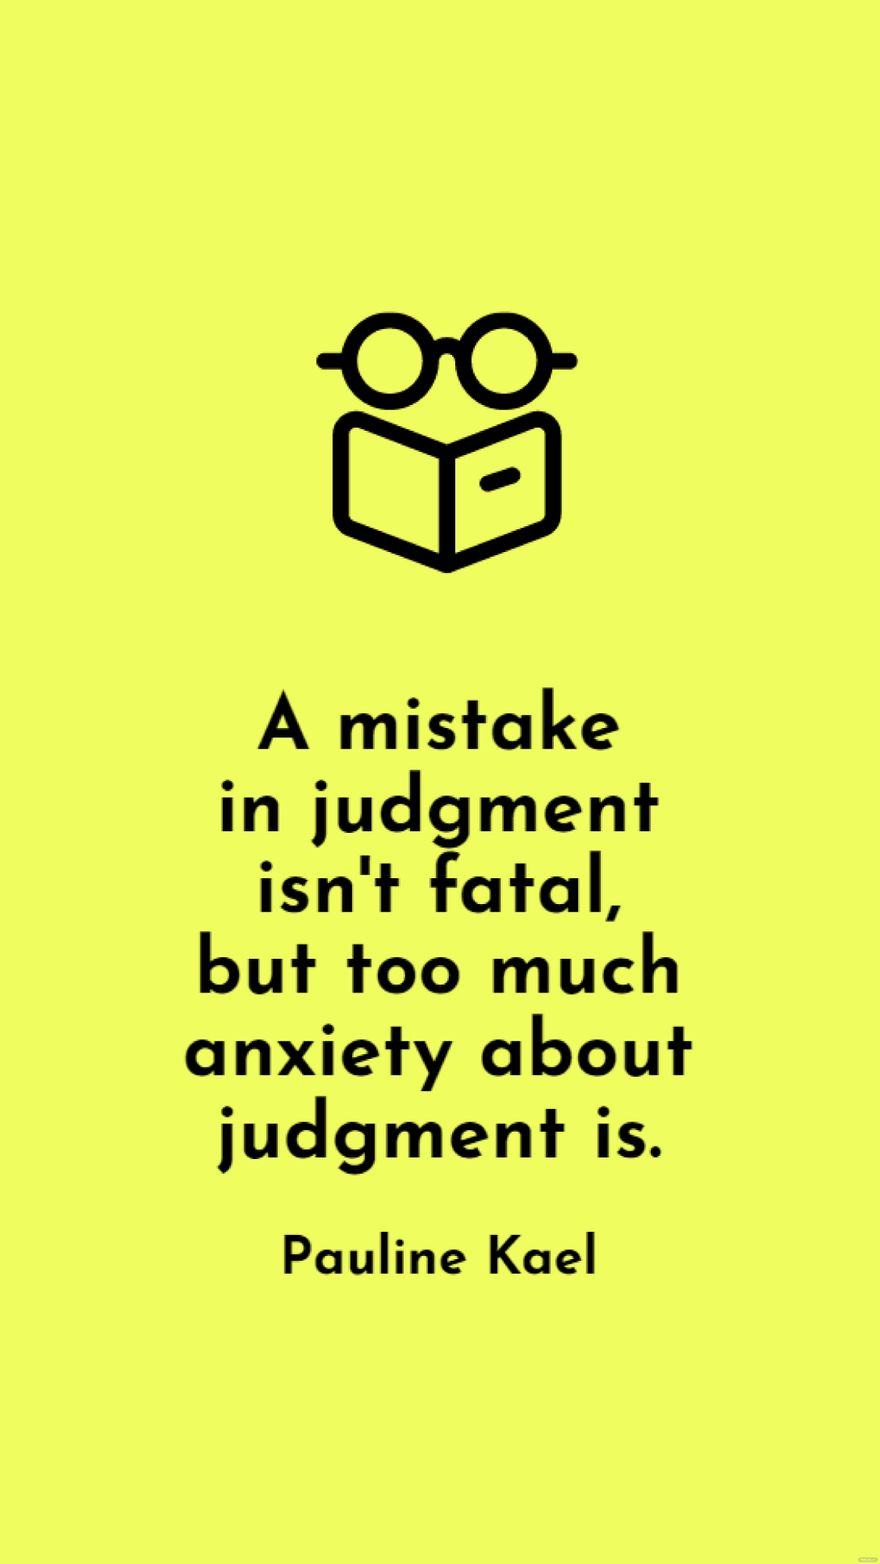 Pauline Kael - A mistake in judgment isn't fatal, but too much anxiety about judgment is.